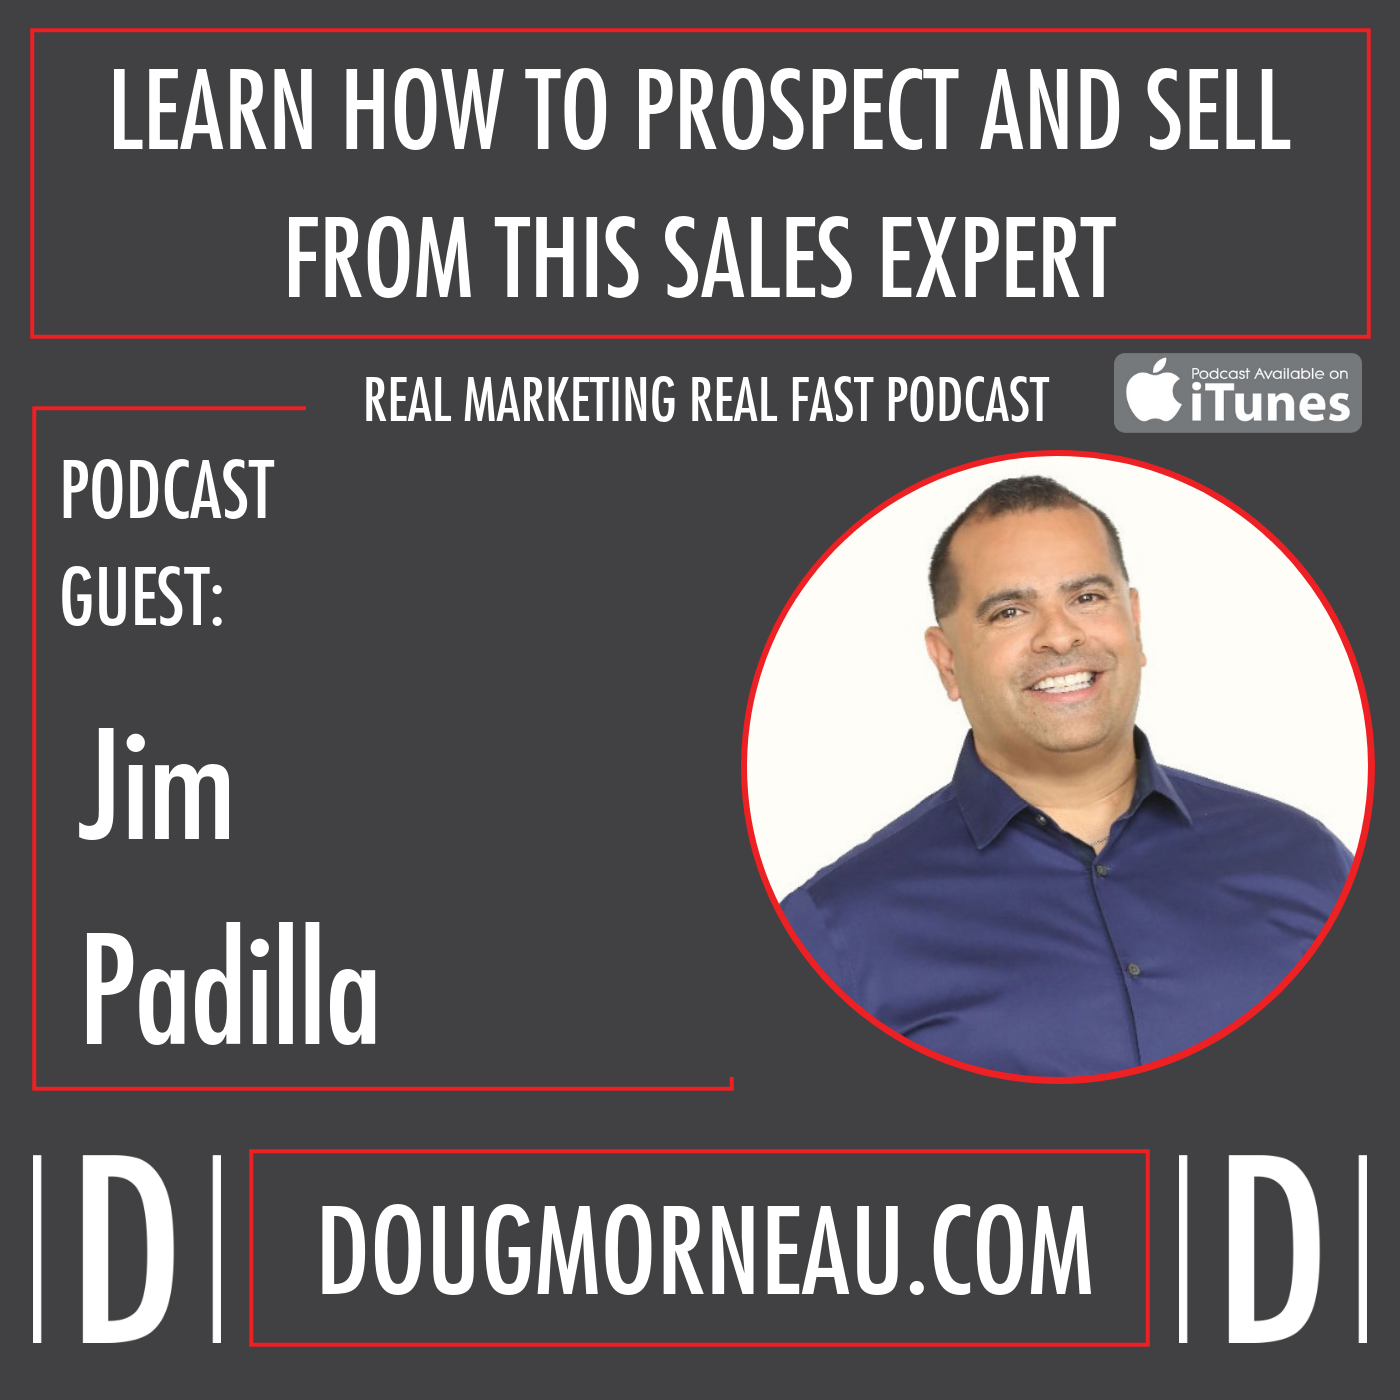 LEARN HOW TO PROSPECT AND SELL FROM THIS SALES EXPERT JIM PADILLA - DOUG MORNEAU - REAL MARKETING REAL FAST PODCAST